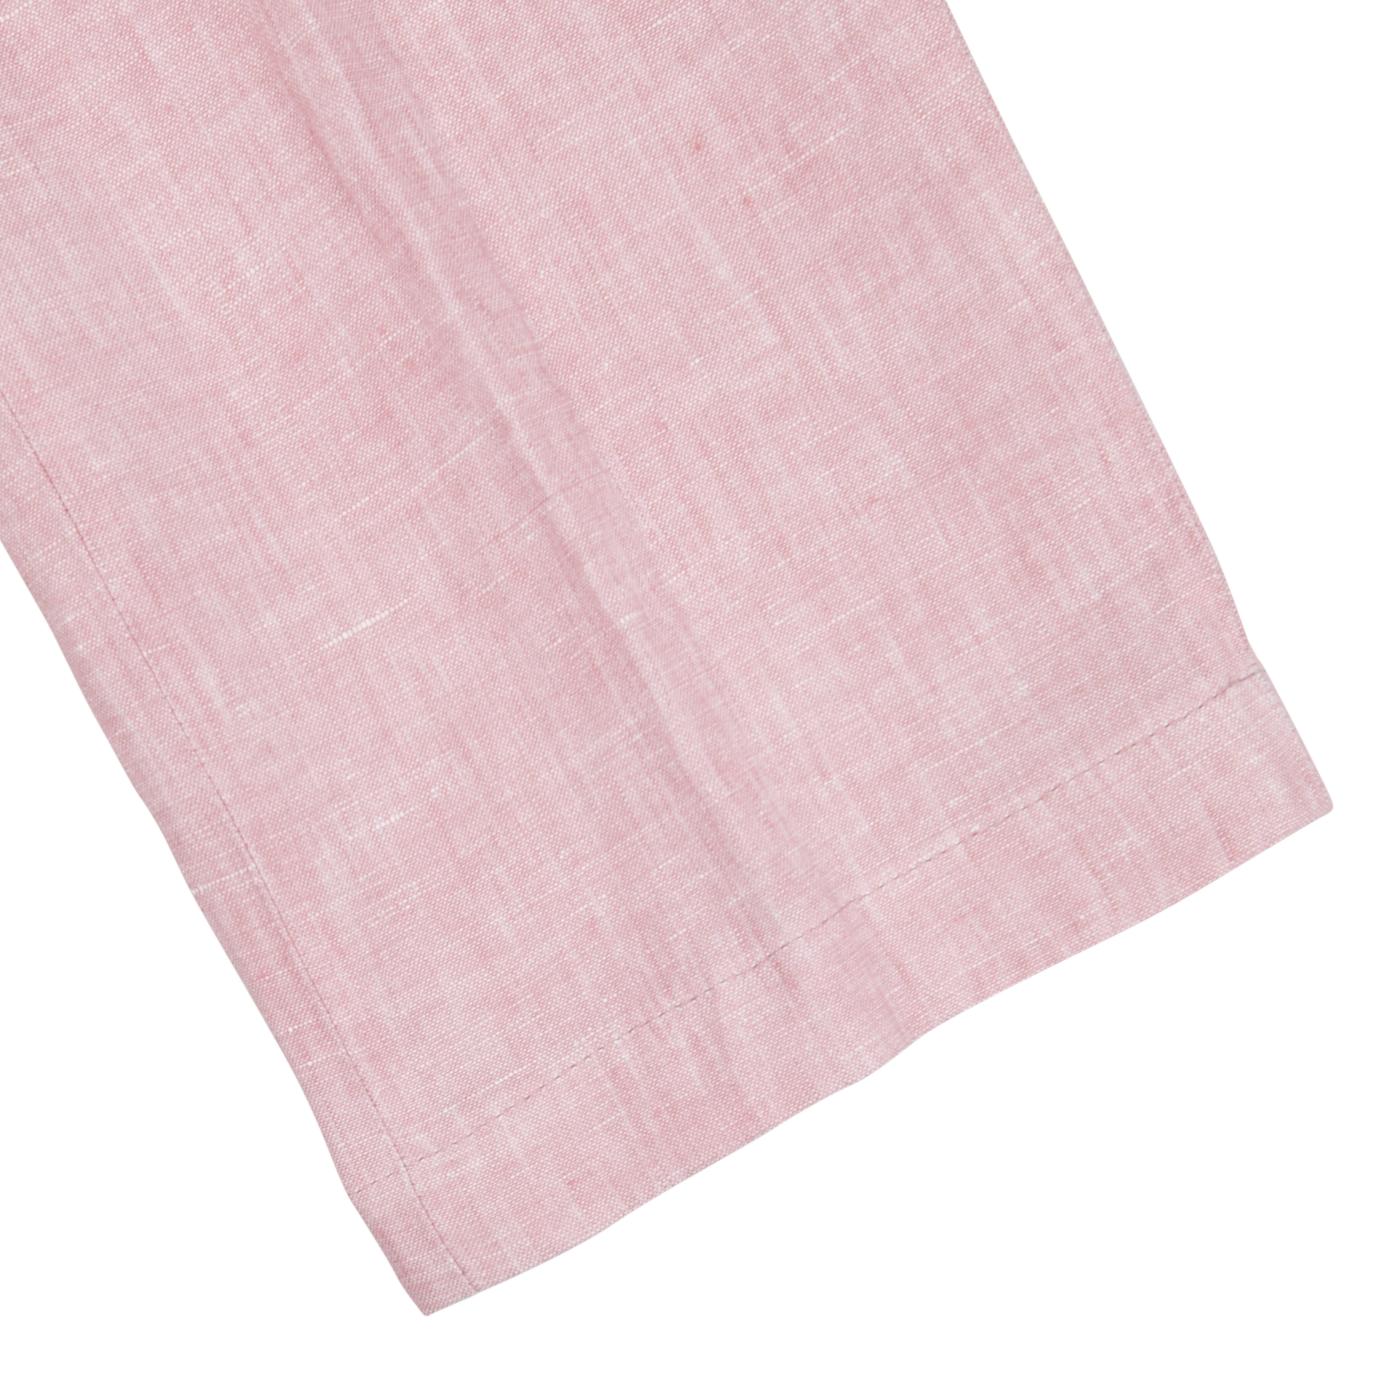 Light pink melange linen fabric with visible weave texture in a white background of Hiltl's Light Pink Washed Linen Regular Fit Chinos.